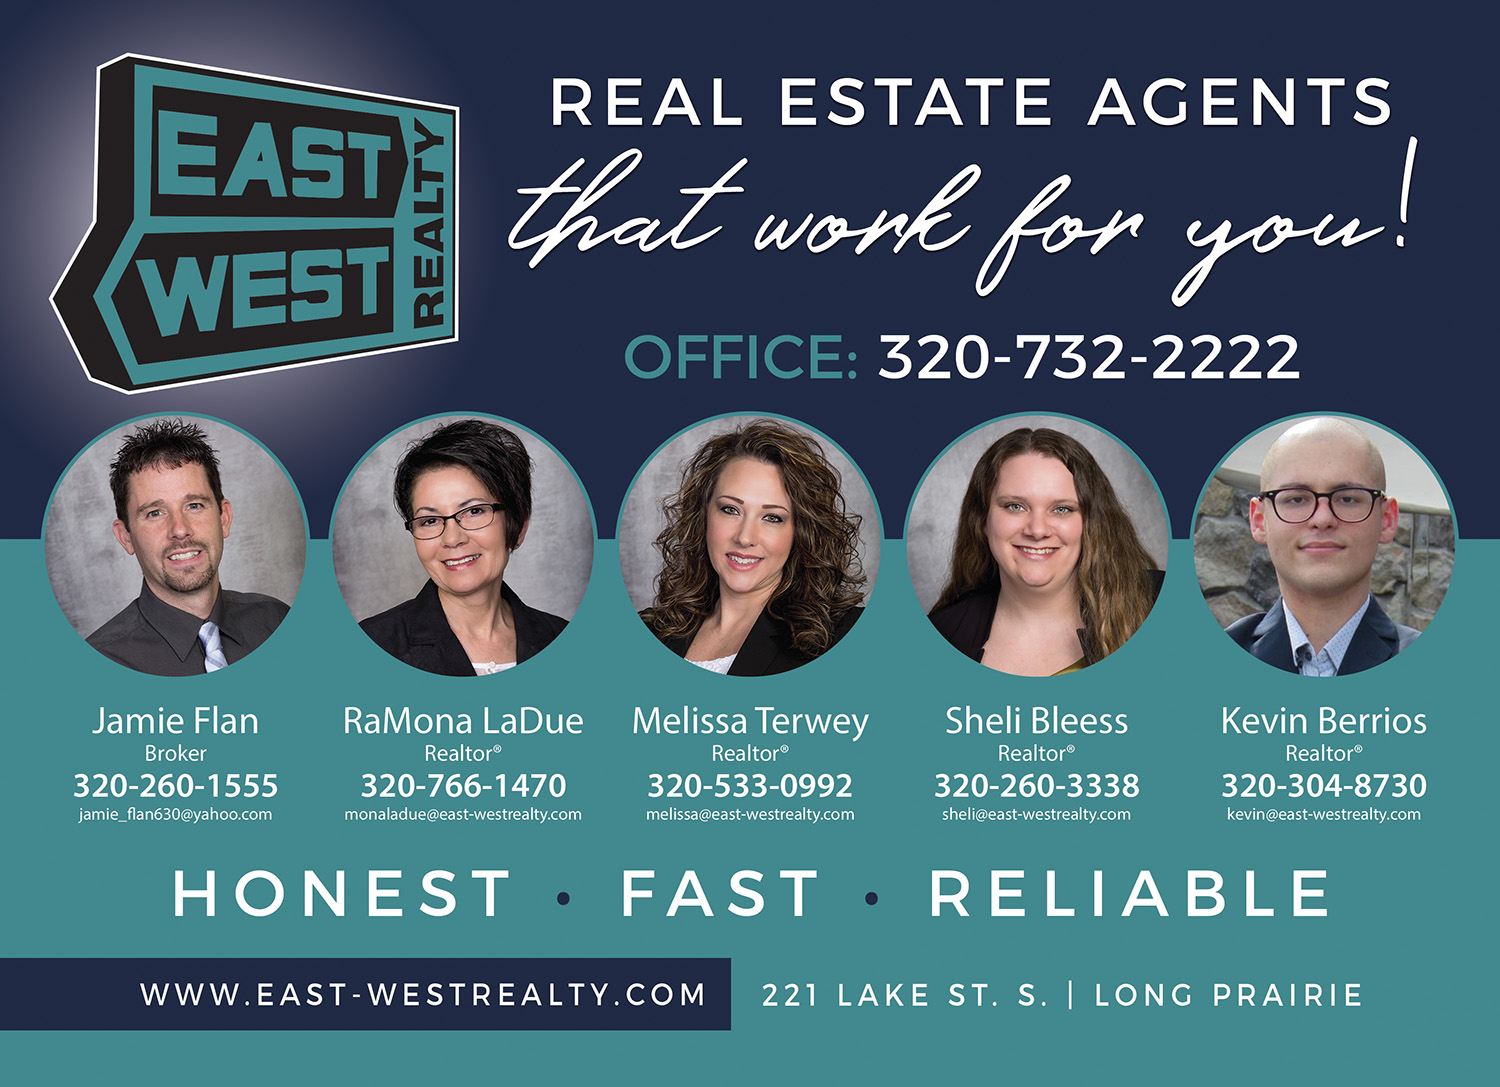 The Real Estate Agents of East-West Realty standing in a 'V' arrangement